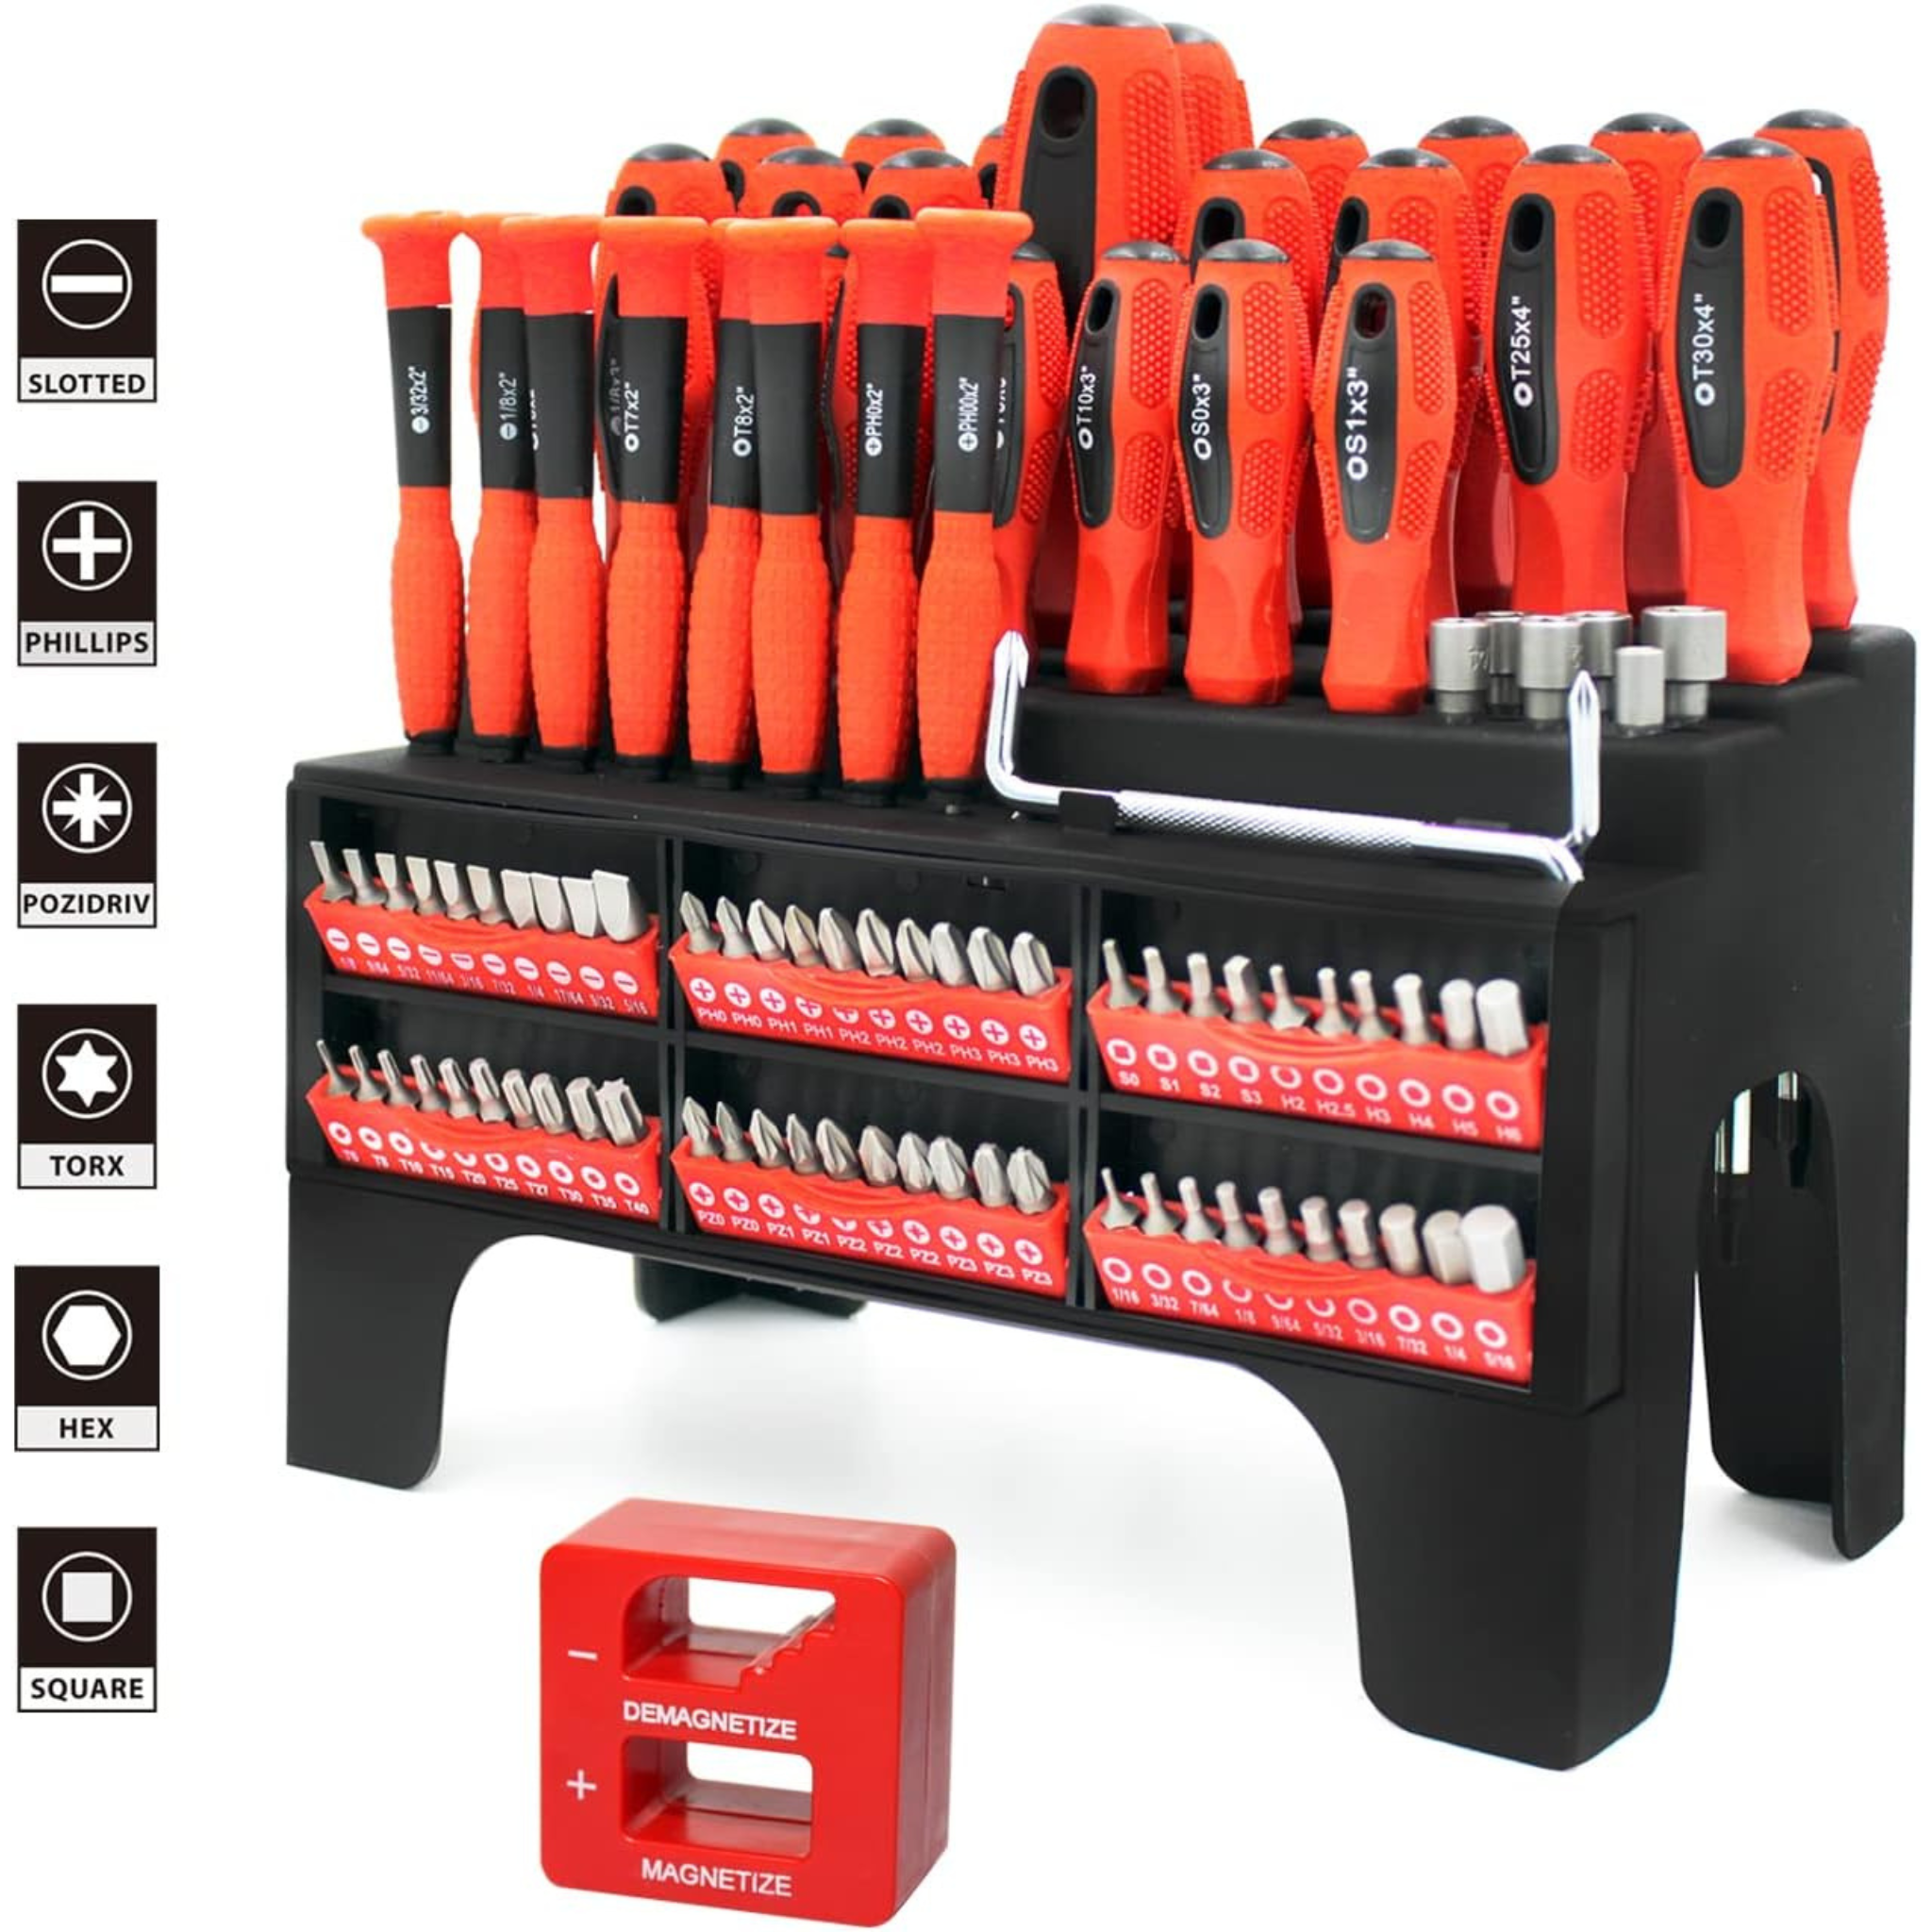 101-Piece Magnetic Screwdriver Set with Organizer Rack